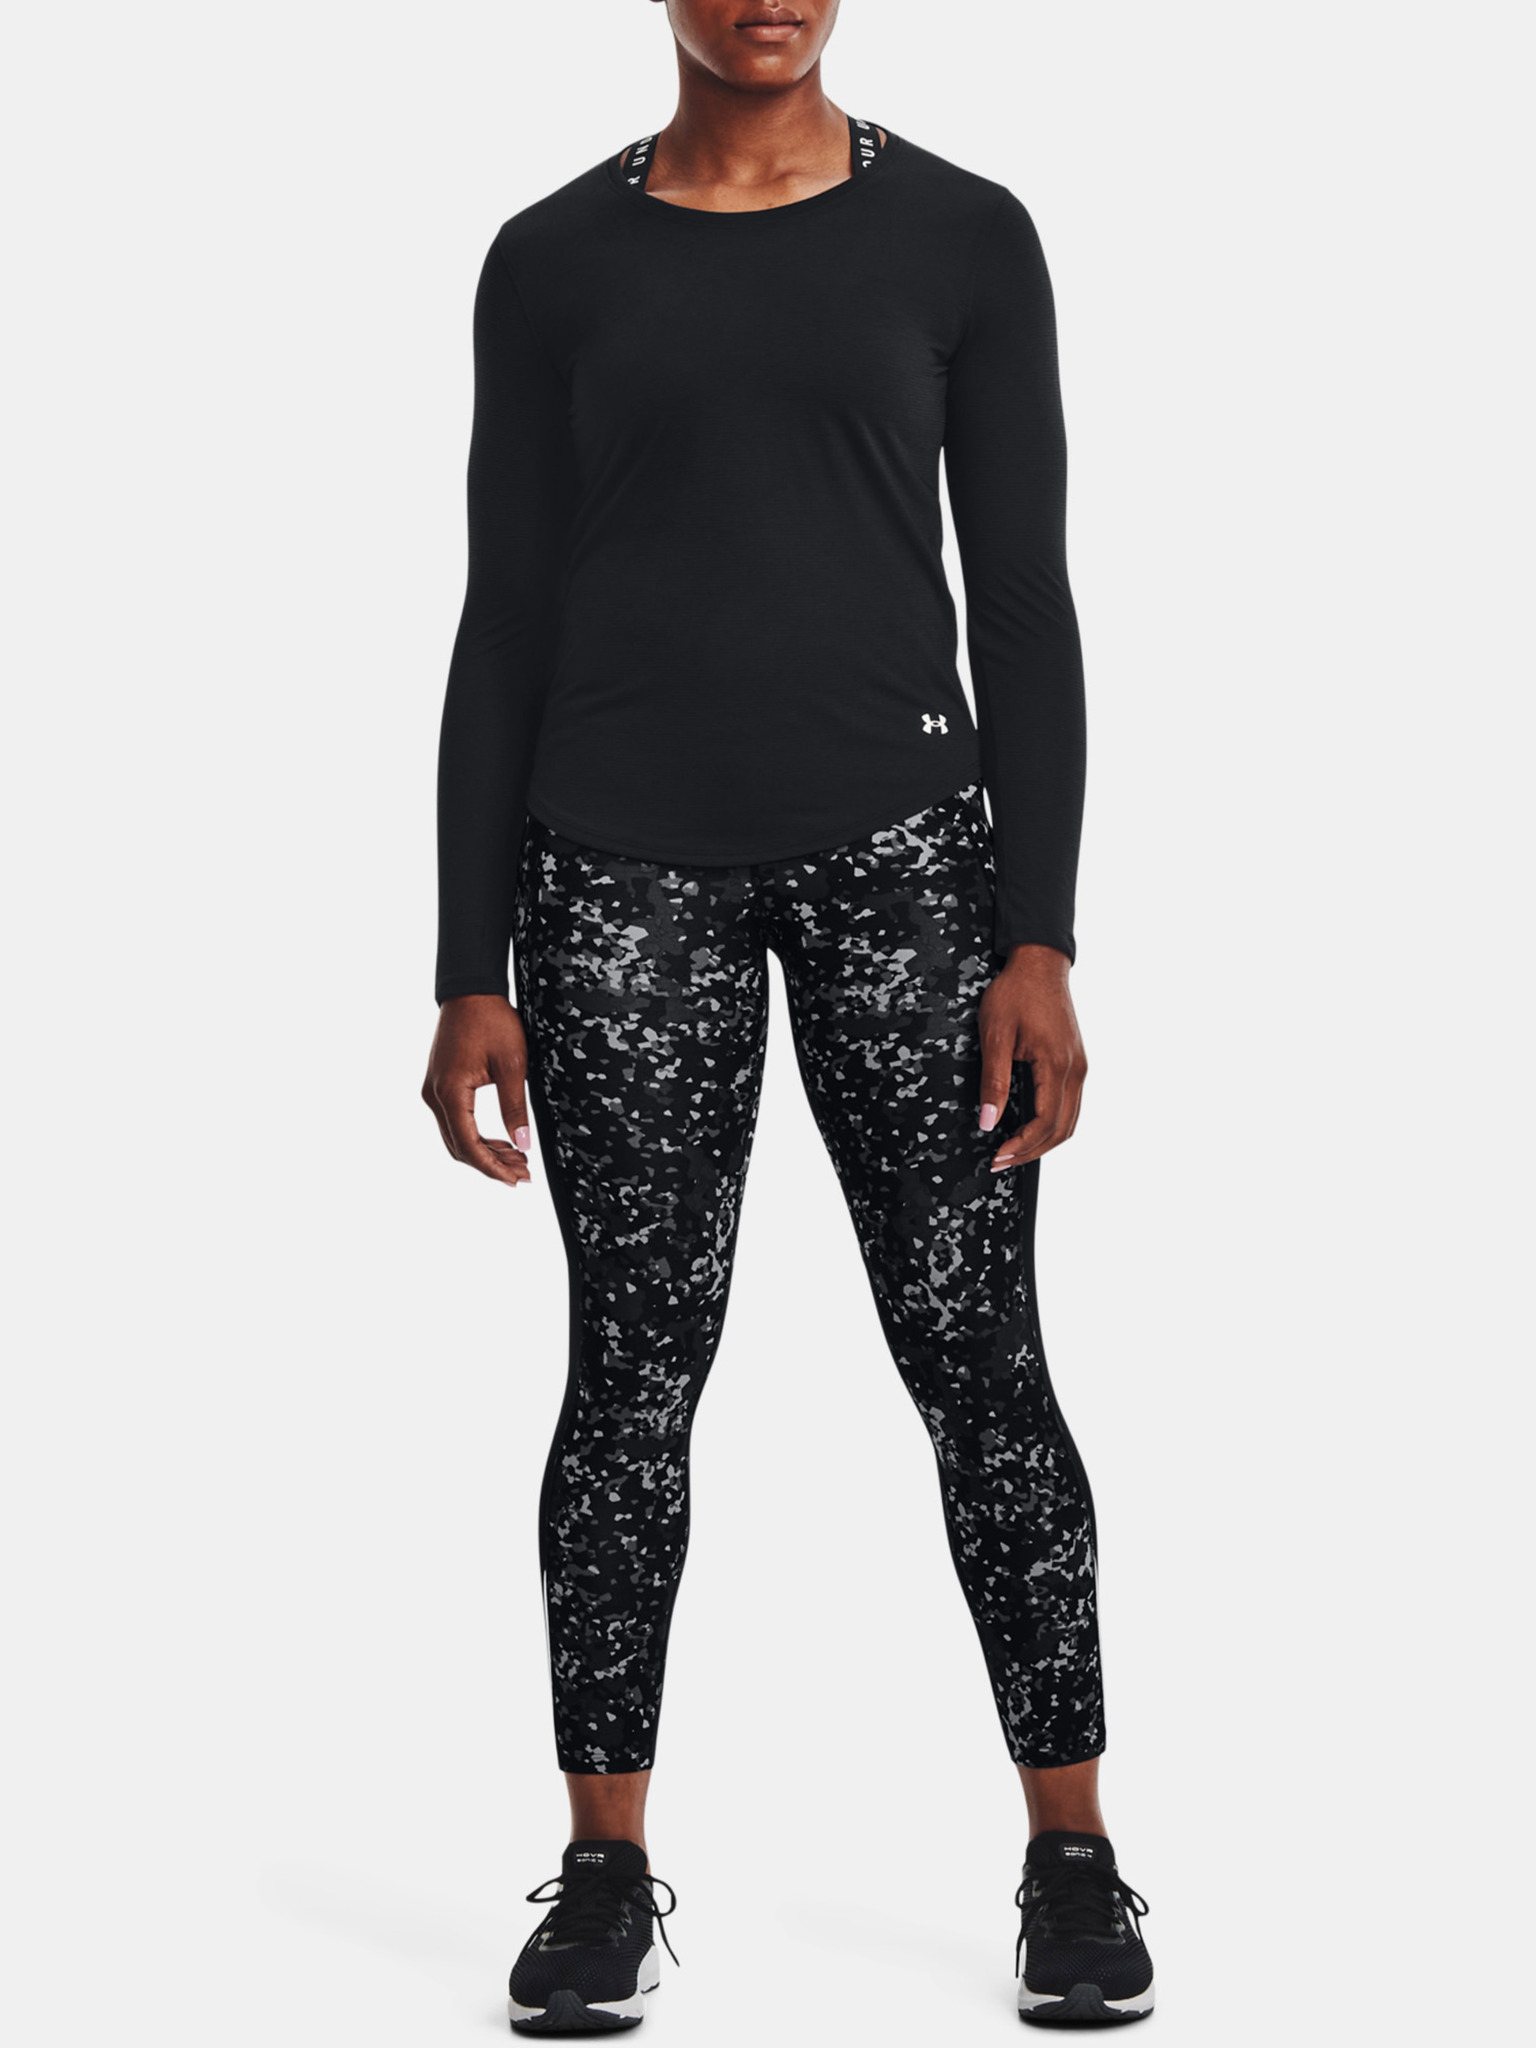 Under Armour - UA Fly Fast Ankle Tight II Leggings